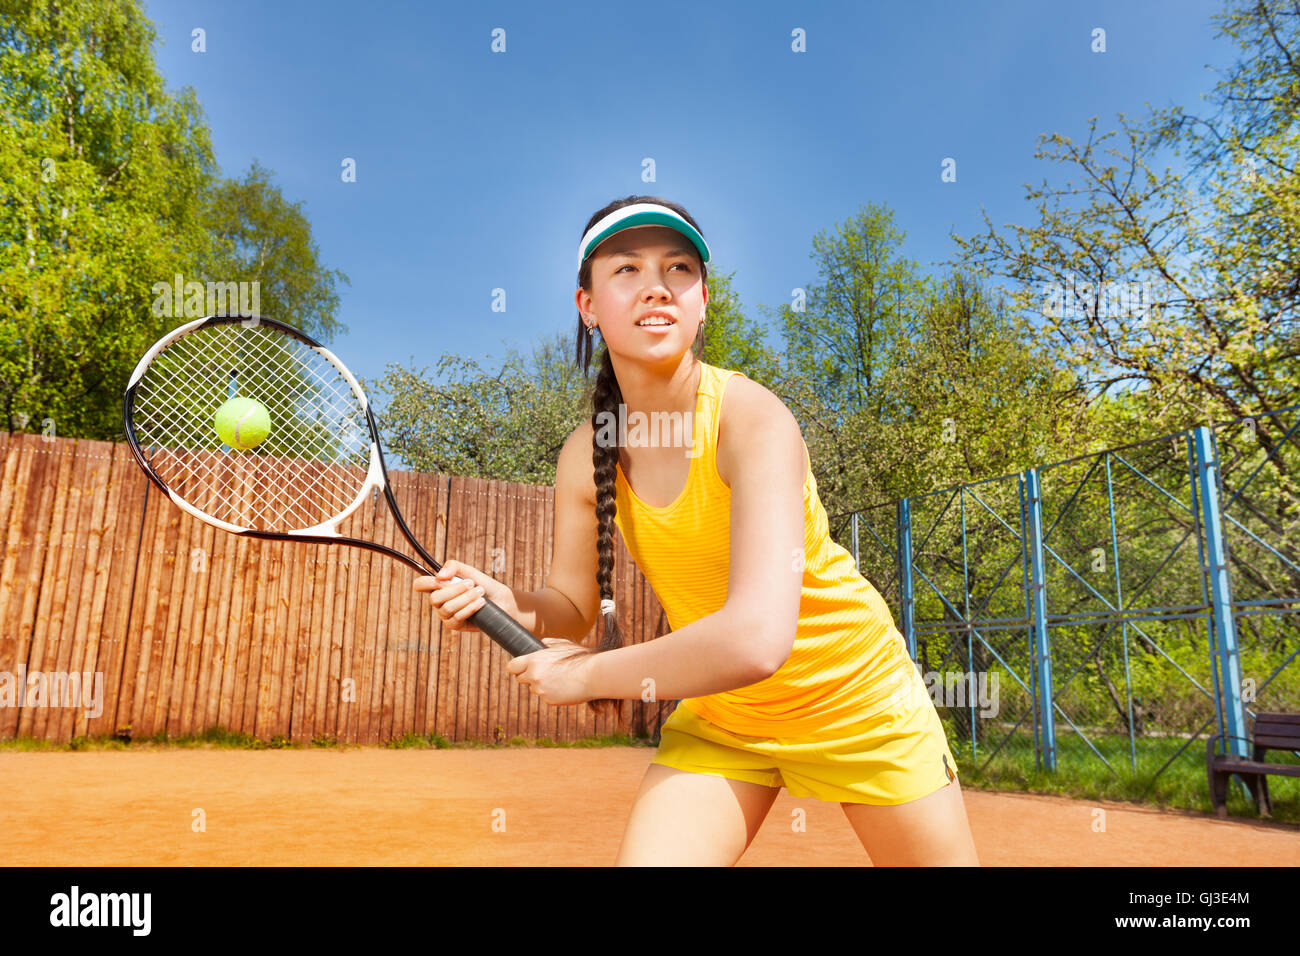 Female tennis player in action outdoor Stock Photo